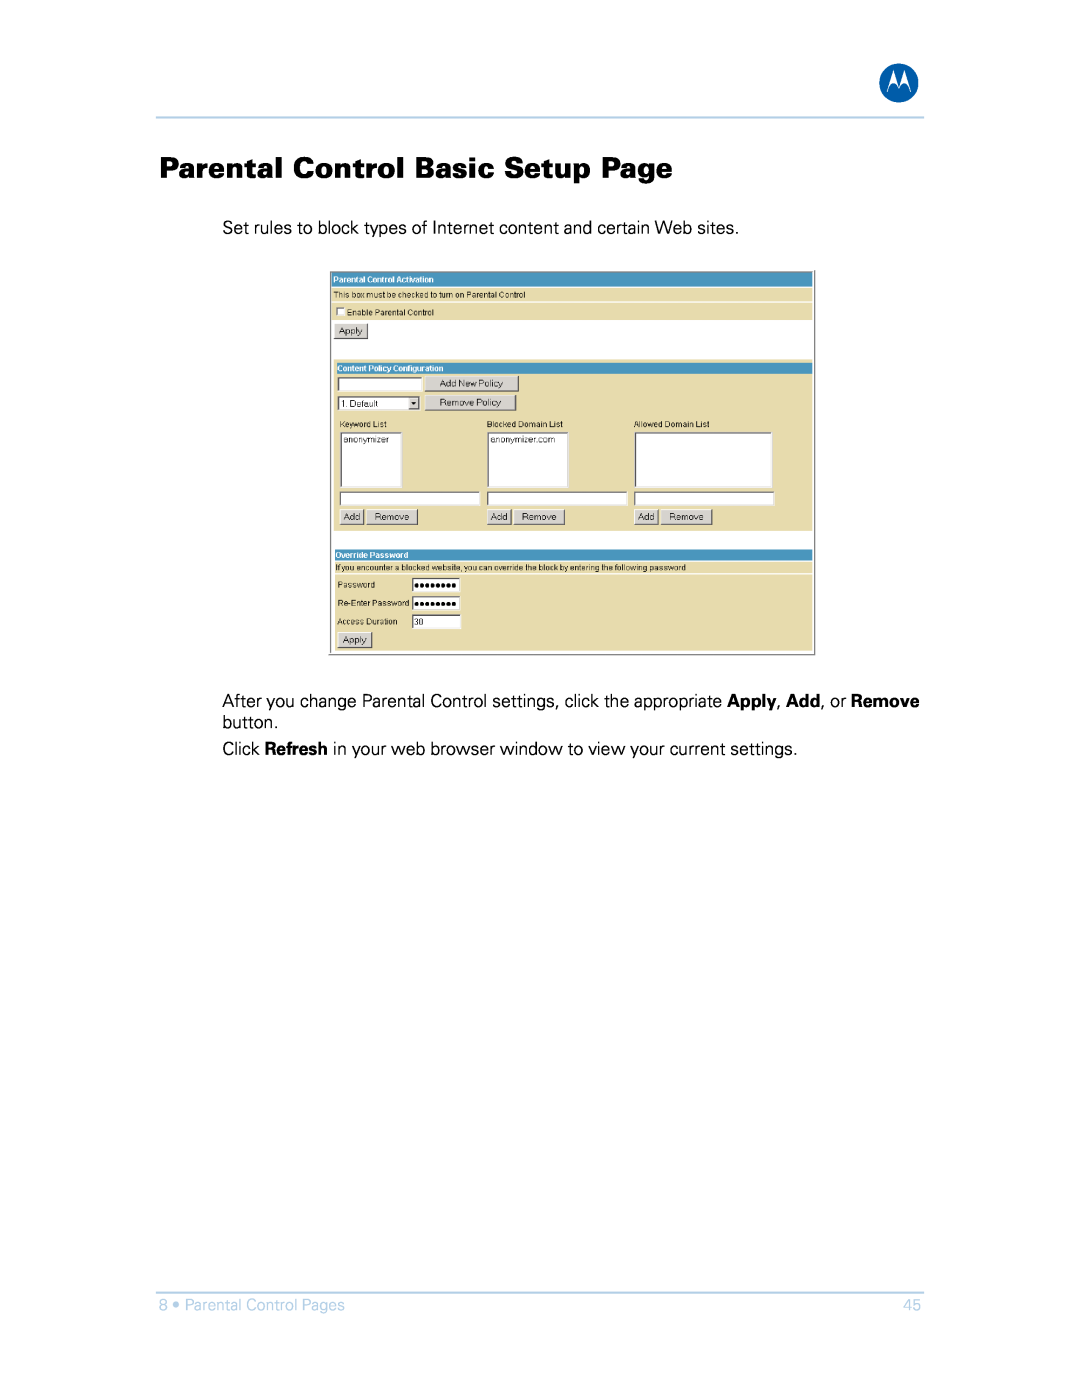 Motorola SVG1501E Parental Control Basic Setup Page, Set rules to block types of Internet content and certain Web sites 